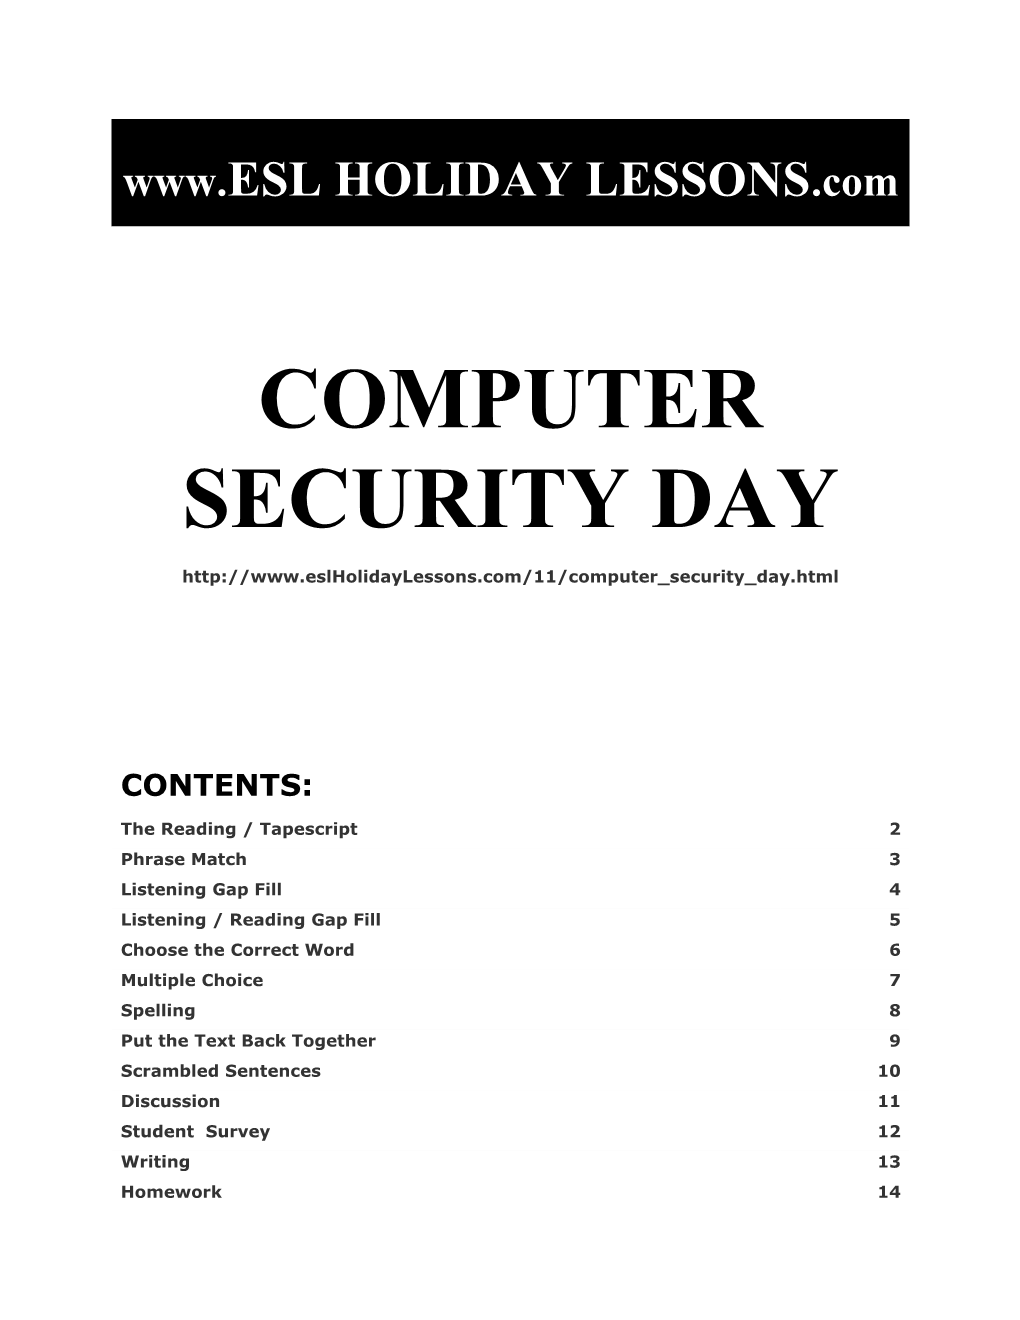 Holiday Lessons - Computer Security Day